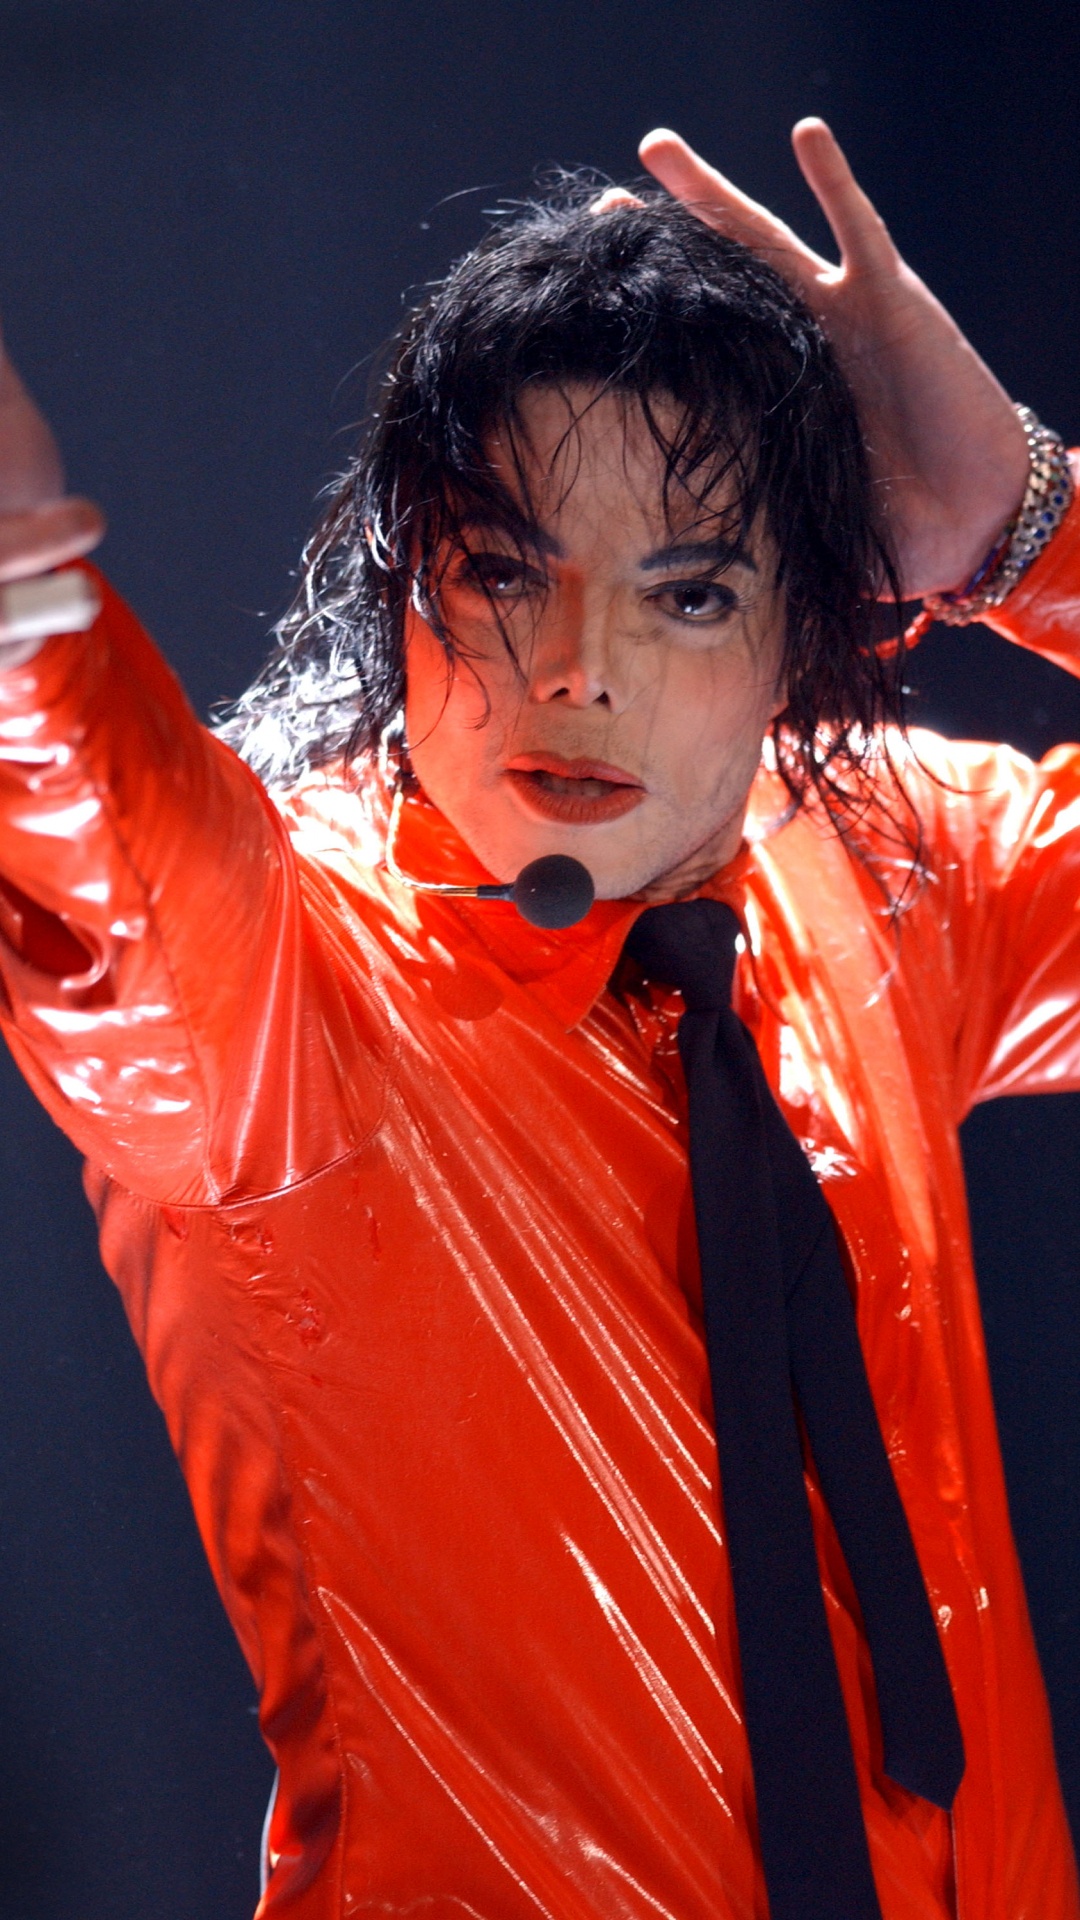 Michael Jackson, Performance, Red, Performing Arts, Singer. Wallpaper in 1080x1920 Resolution